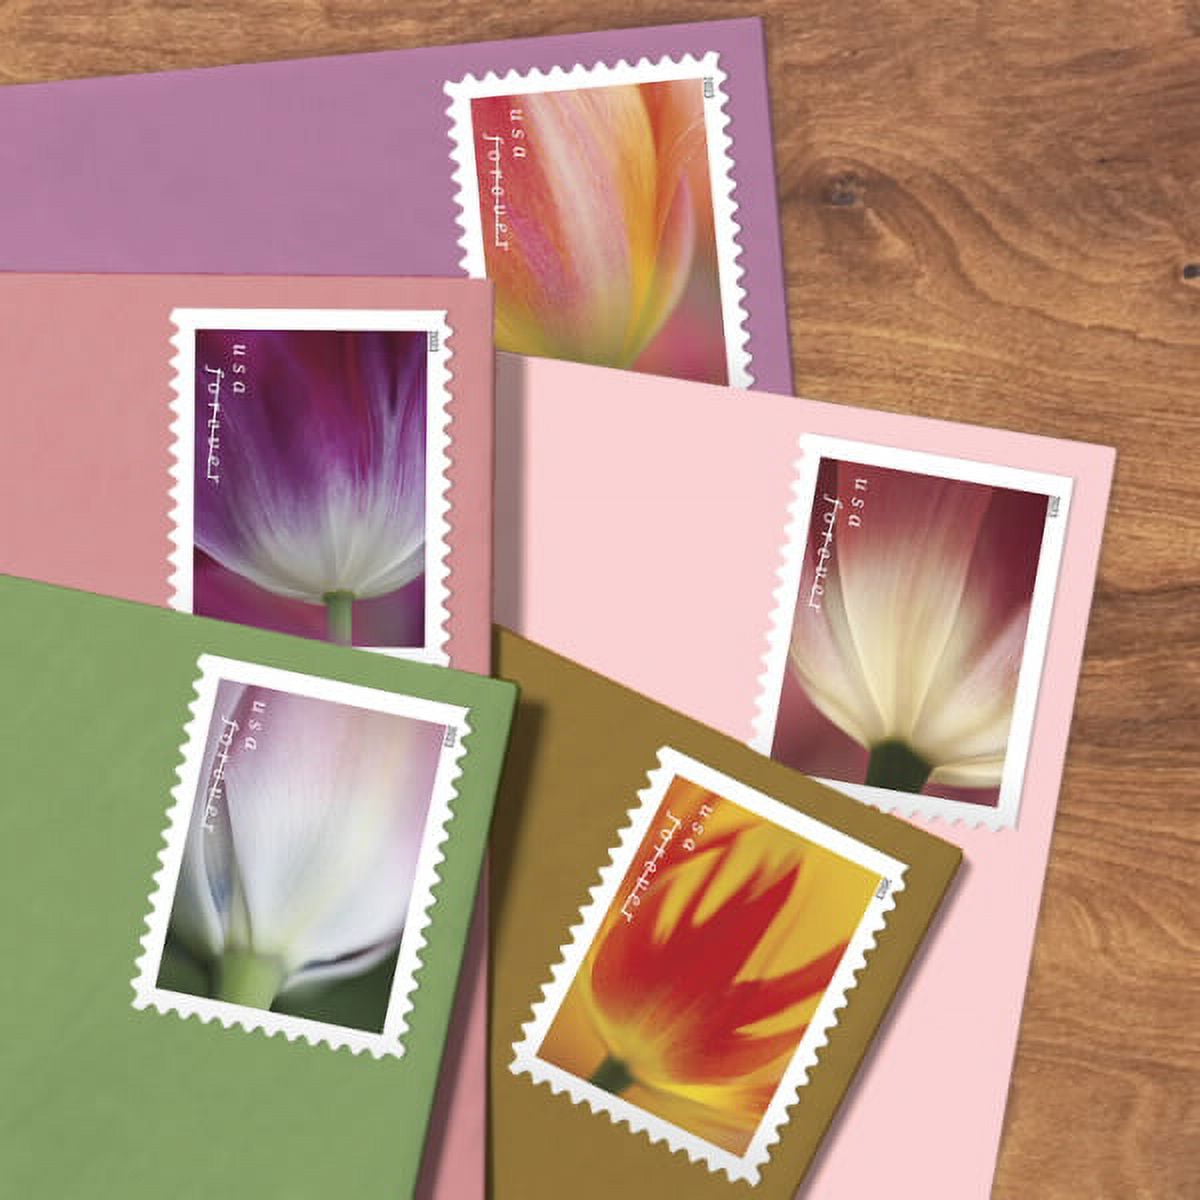  Cactus Flowers Book of 20 Forever First Class Postage Stamps  Celebration Wedding : Office Products